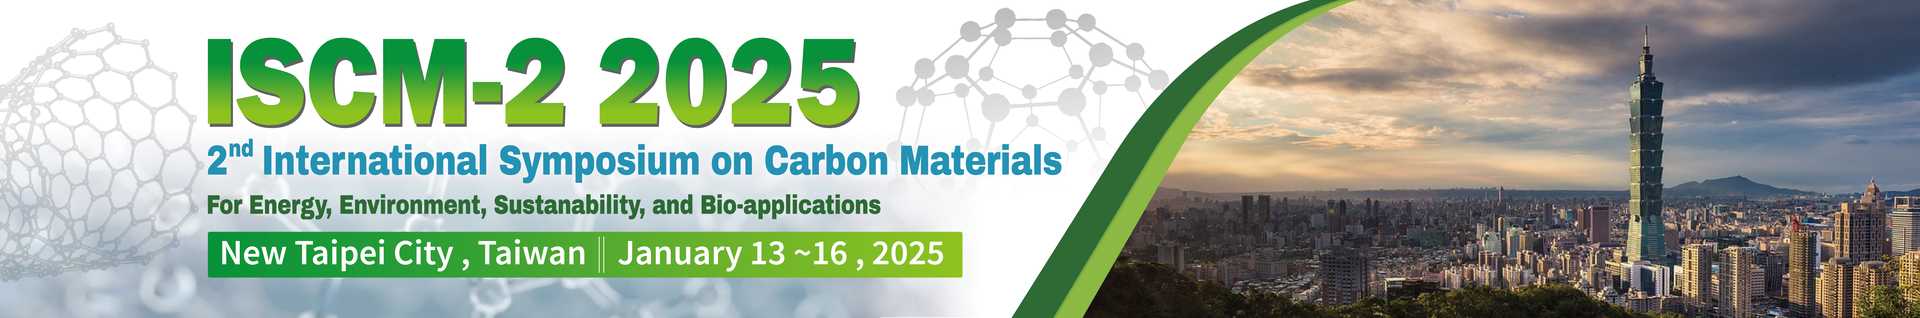 2nd International Symposium on Carbon Materials (2025 ISCM-2)